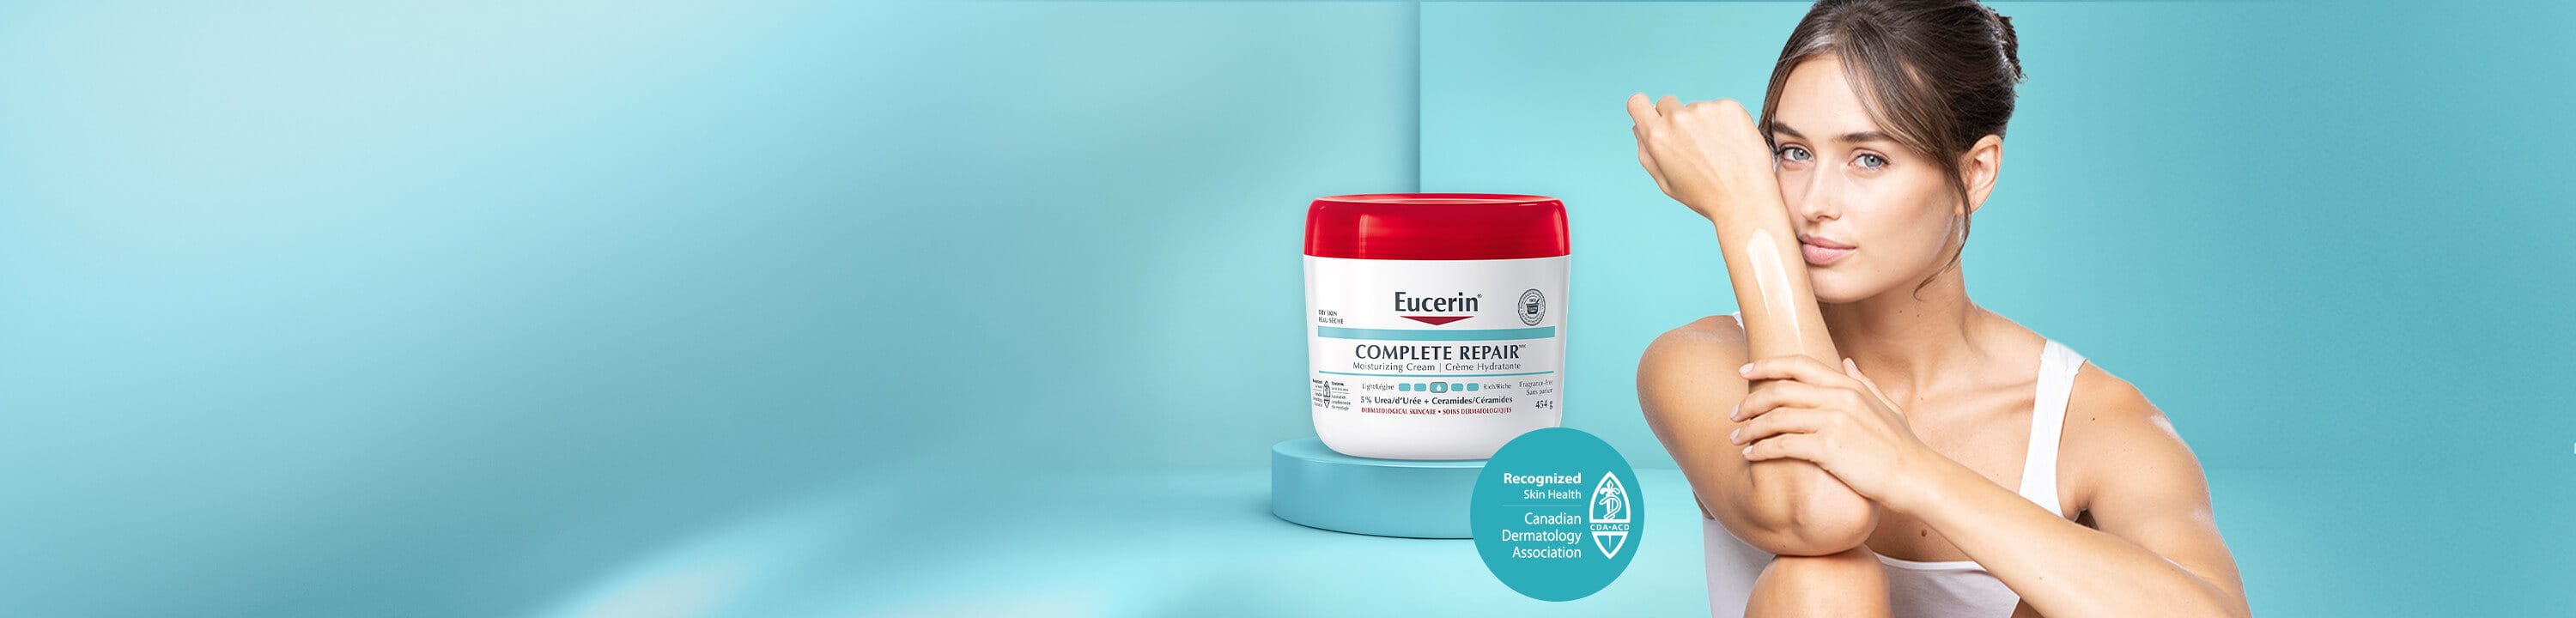 View of a female model wearing a white tank top and sitting down with her knees bent with the Eucerin Complete Repair 454g product in the background.